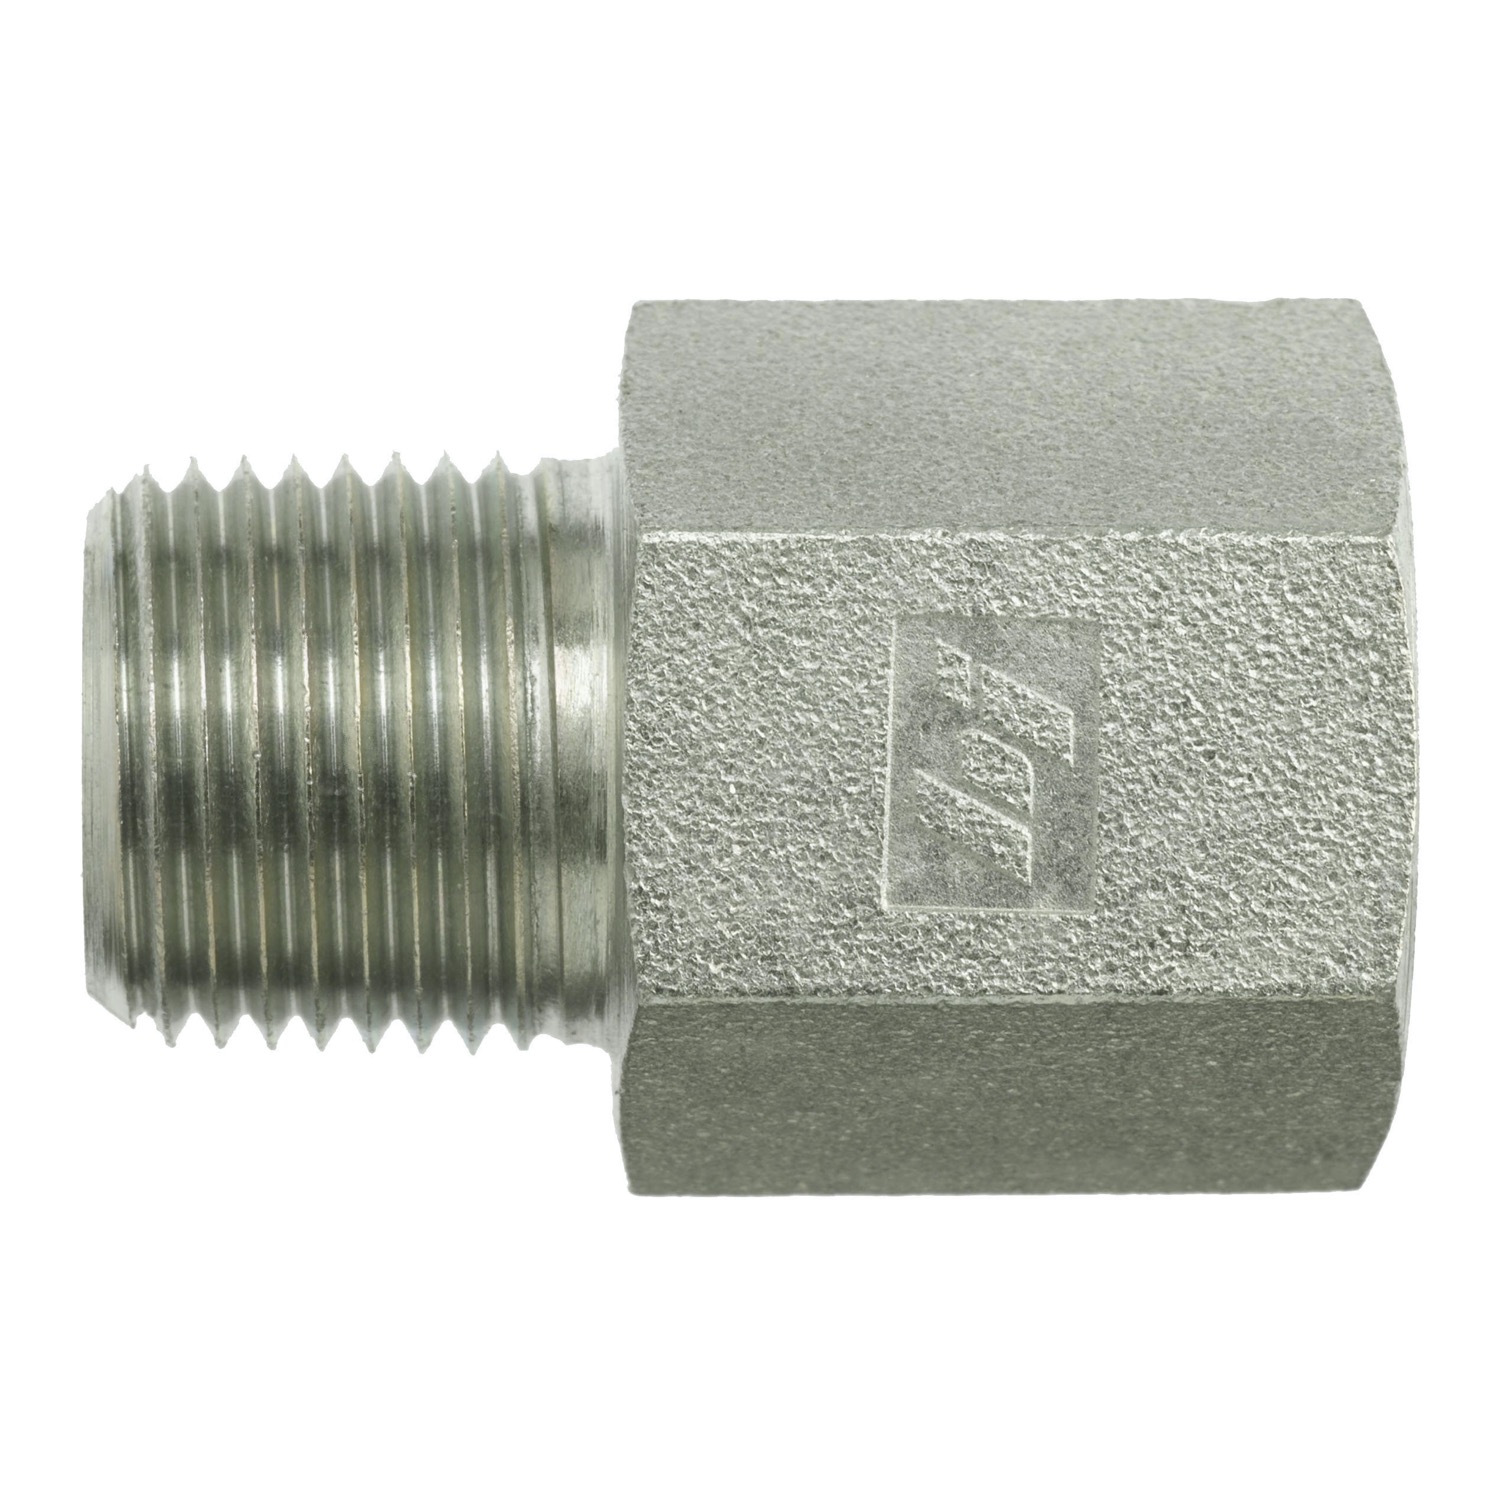 Hydraulic Hose Adapters - Straight Expander Fitting, NPTF, 5405 Series